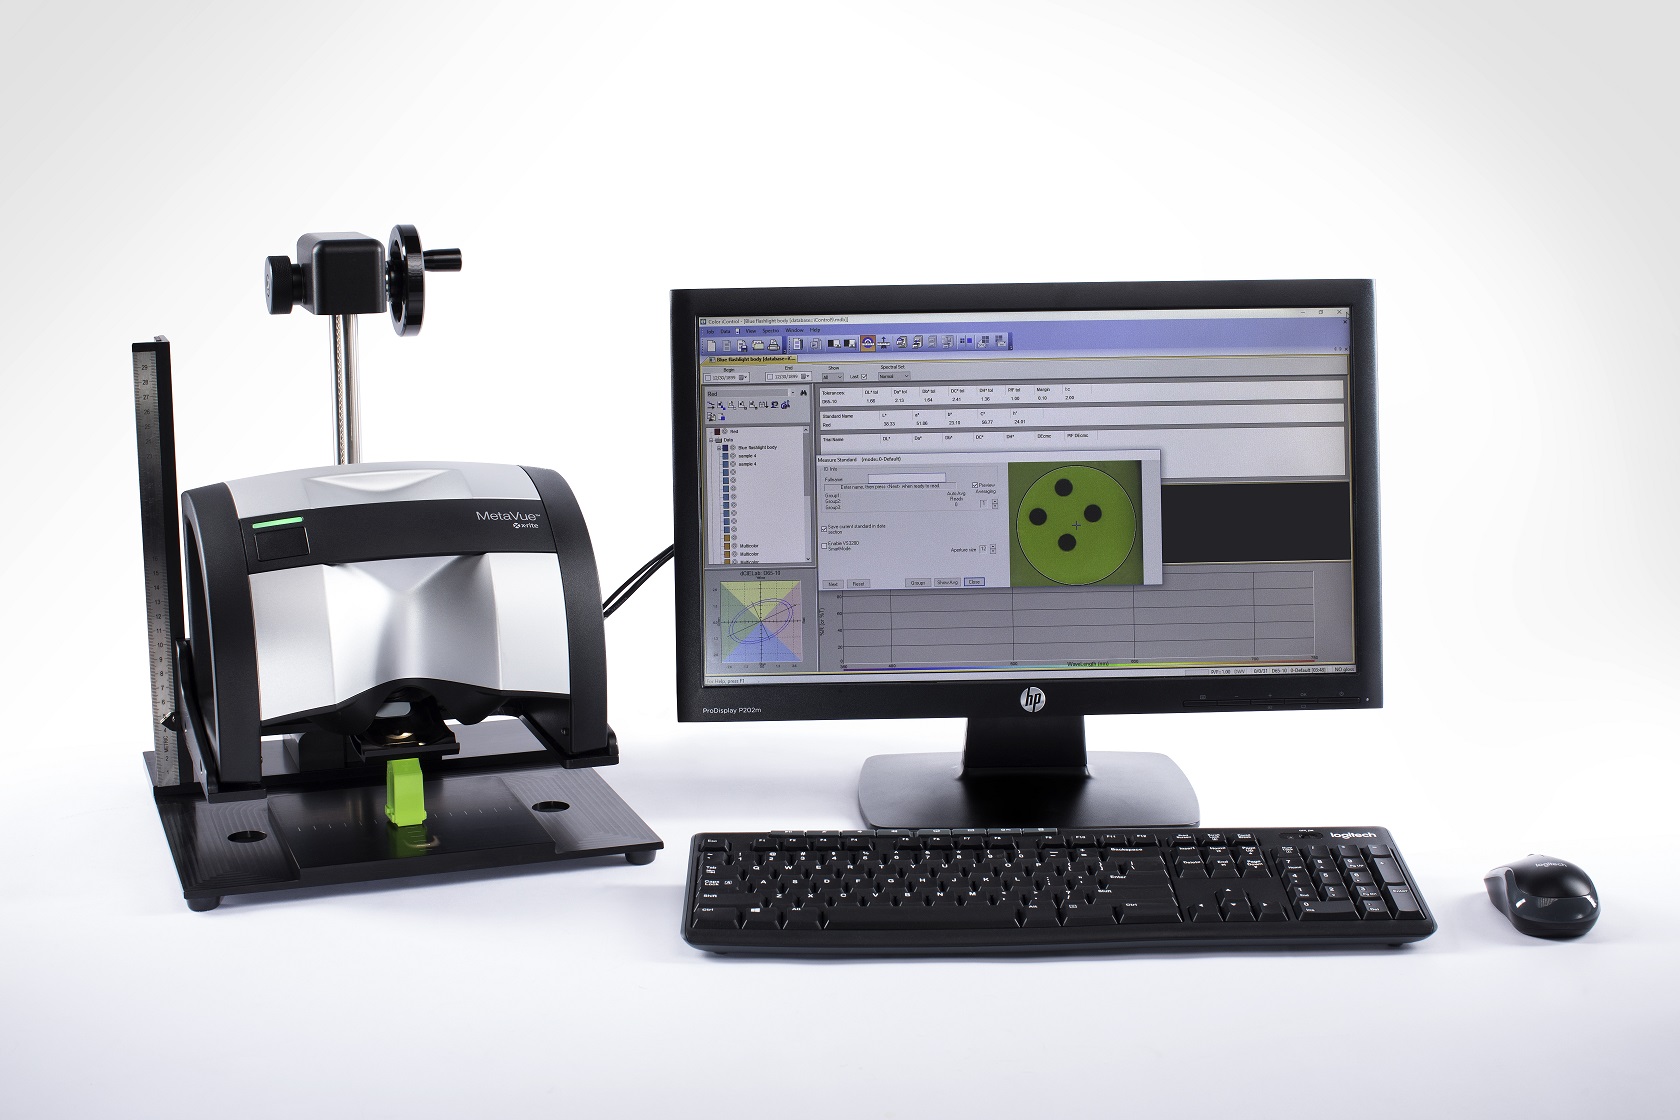 xrite-to-showcase-imaging-spectrophotometers-02